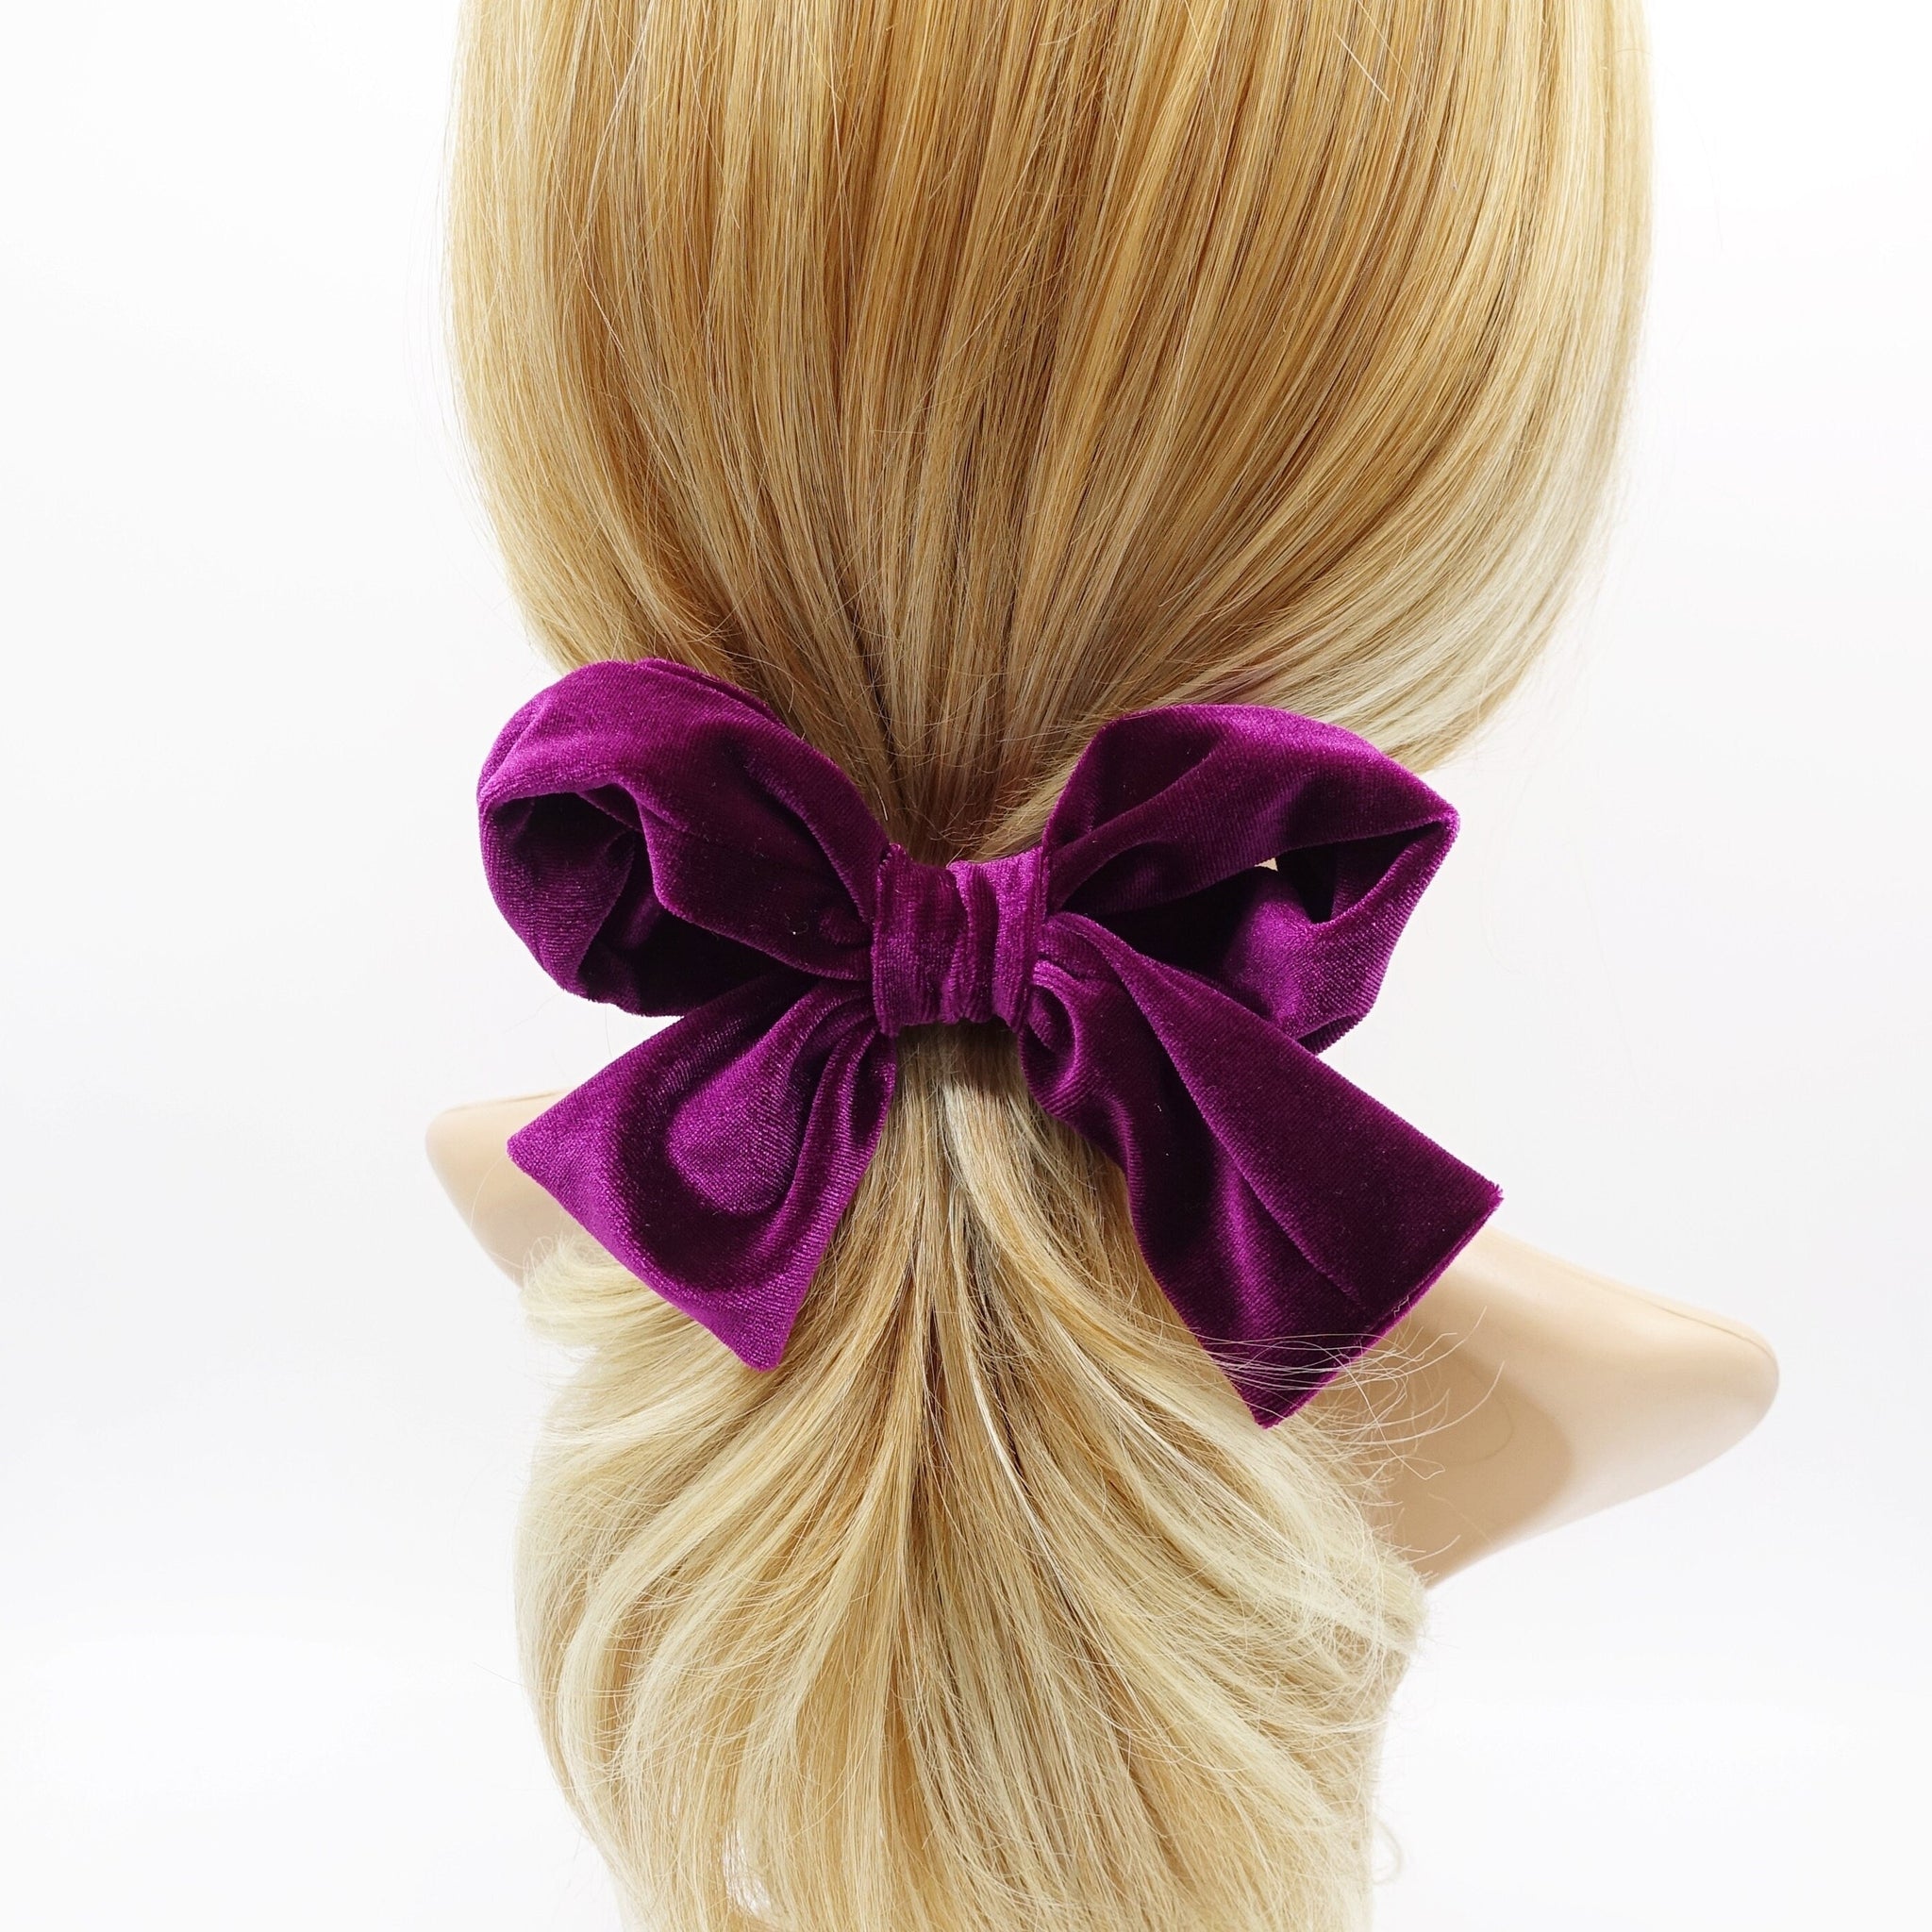 veryshine.com Barrette (Bow) Purple pink velvet wired bow hair accessory for women